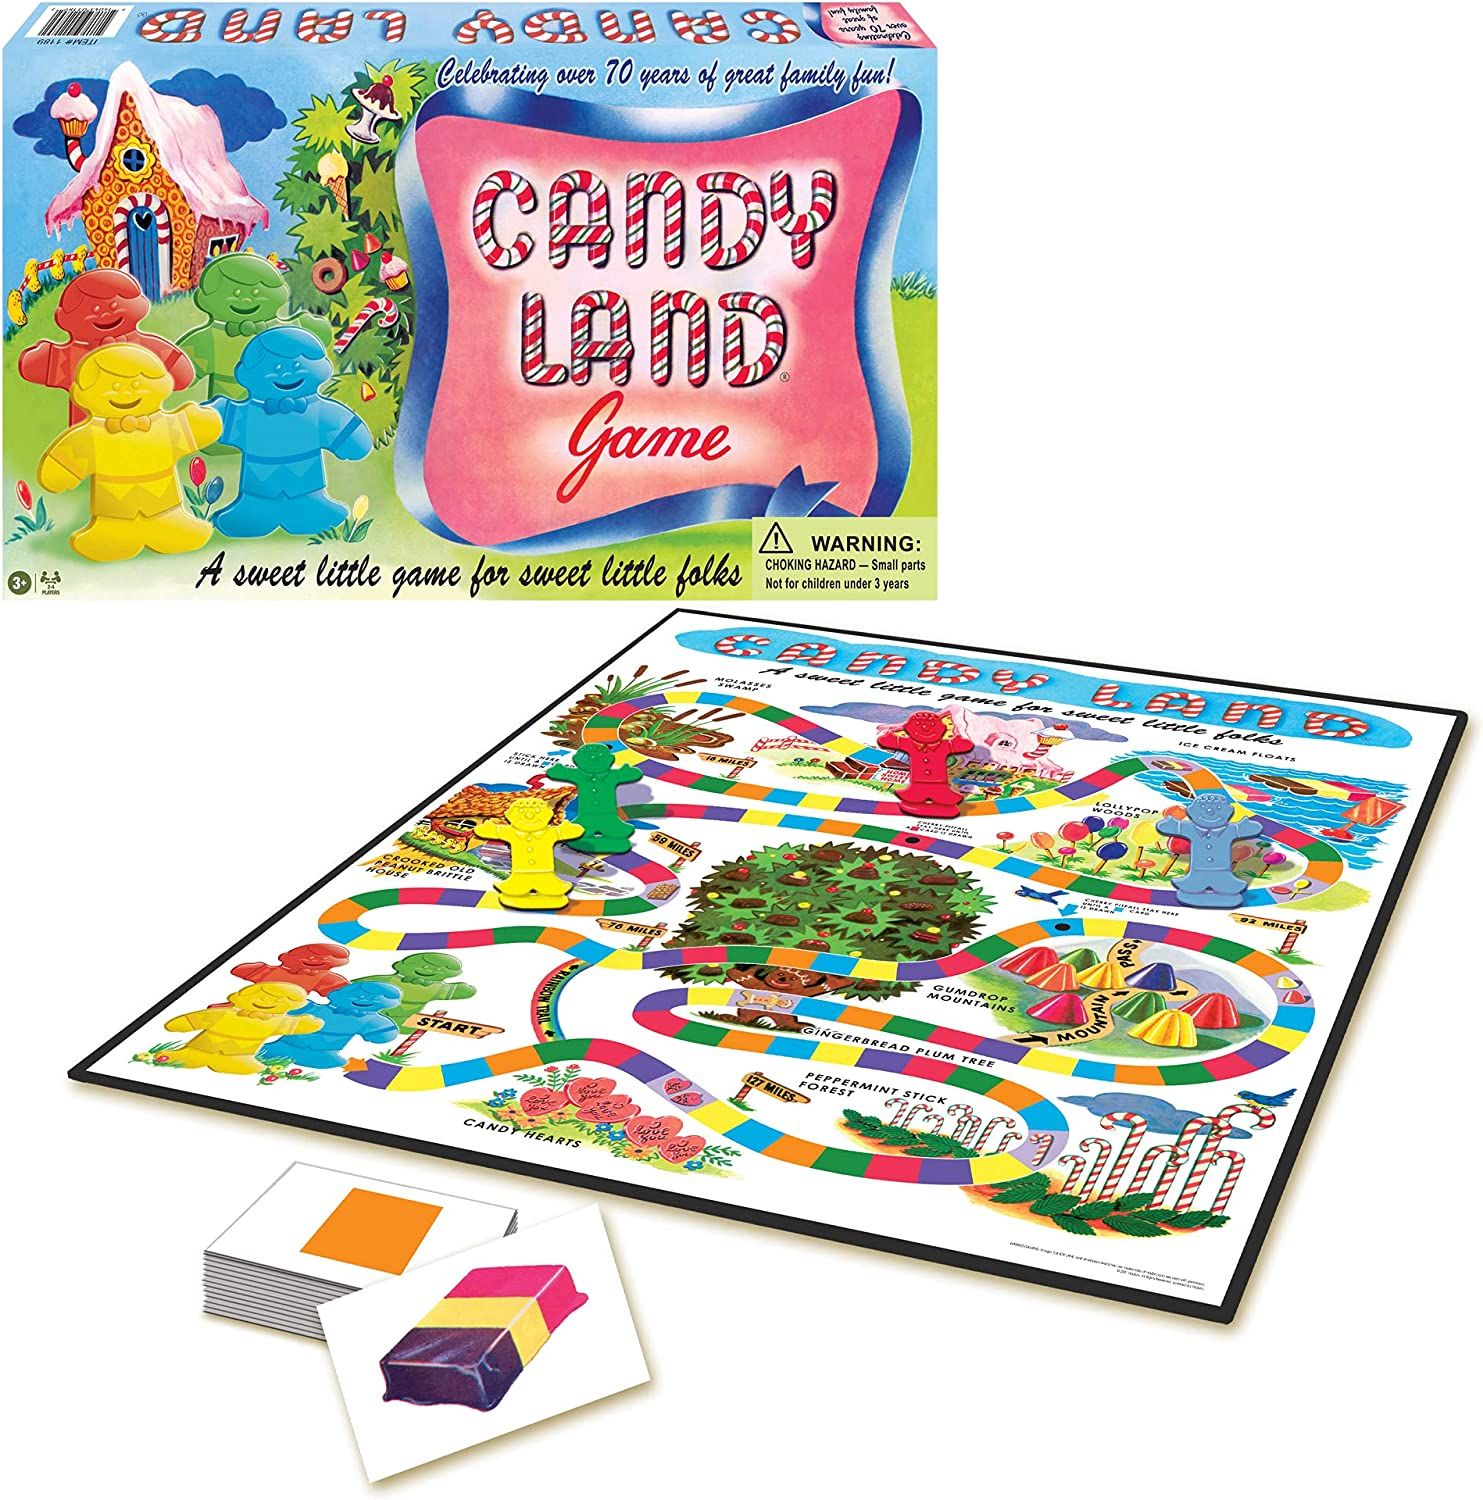 Candy Land is one of the best legacy board games